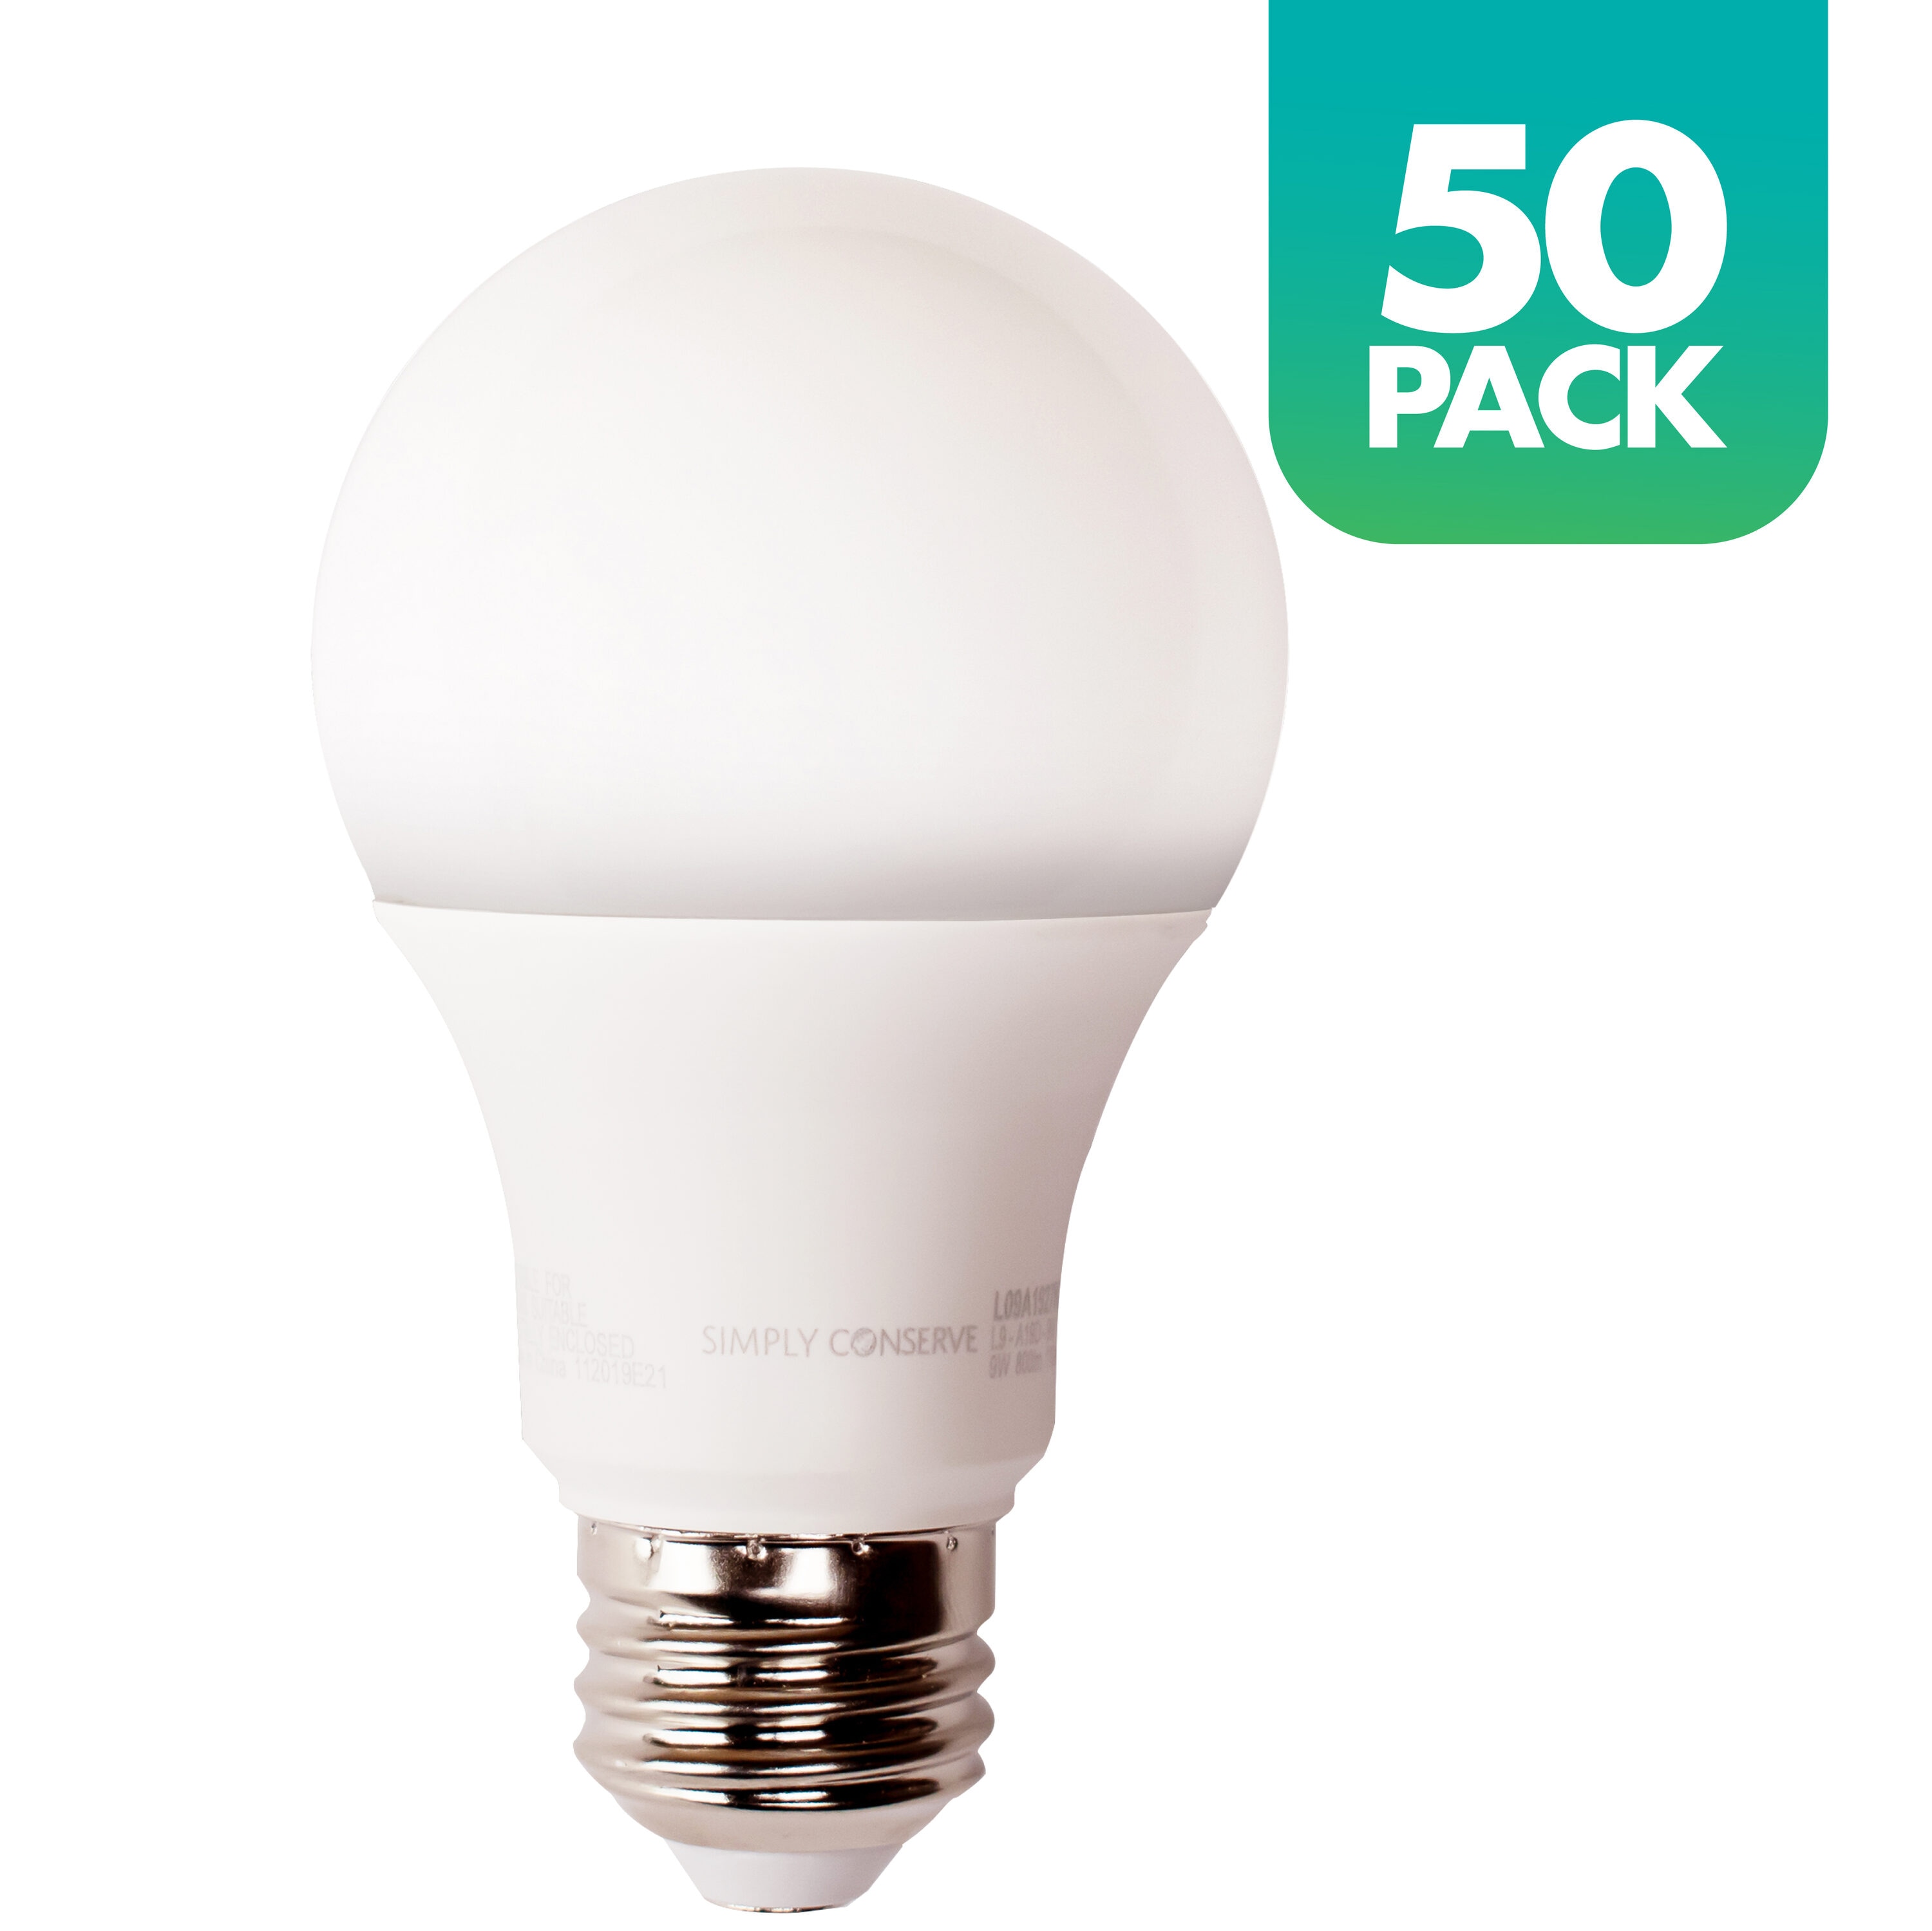 Beeldhouwer Gewoon overlopen Vergelding Simply Conserve ENERGY STAR 100-Watt EQ A19 Daylight Medium Base (e-26)  Dimmable LED Light Bulb (50-Pack) in the General Purpose LED Light Bulbs  department at Lowes.com